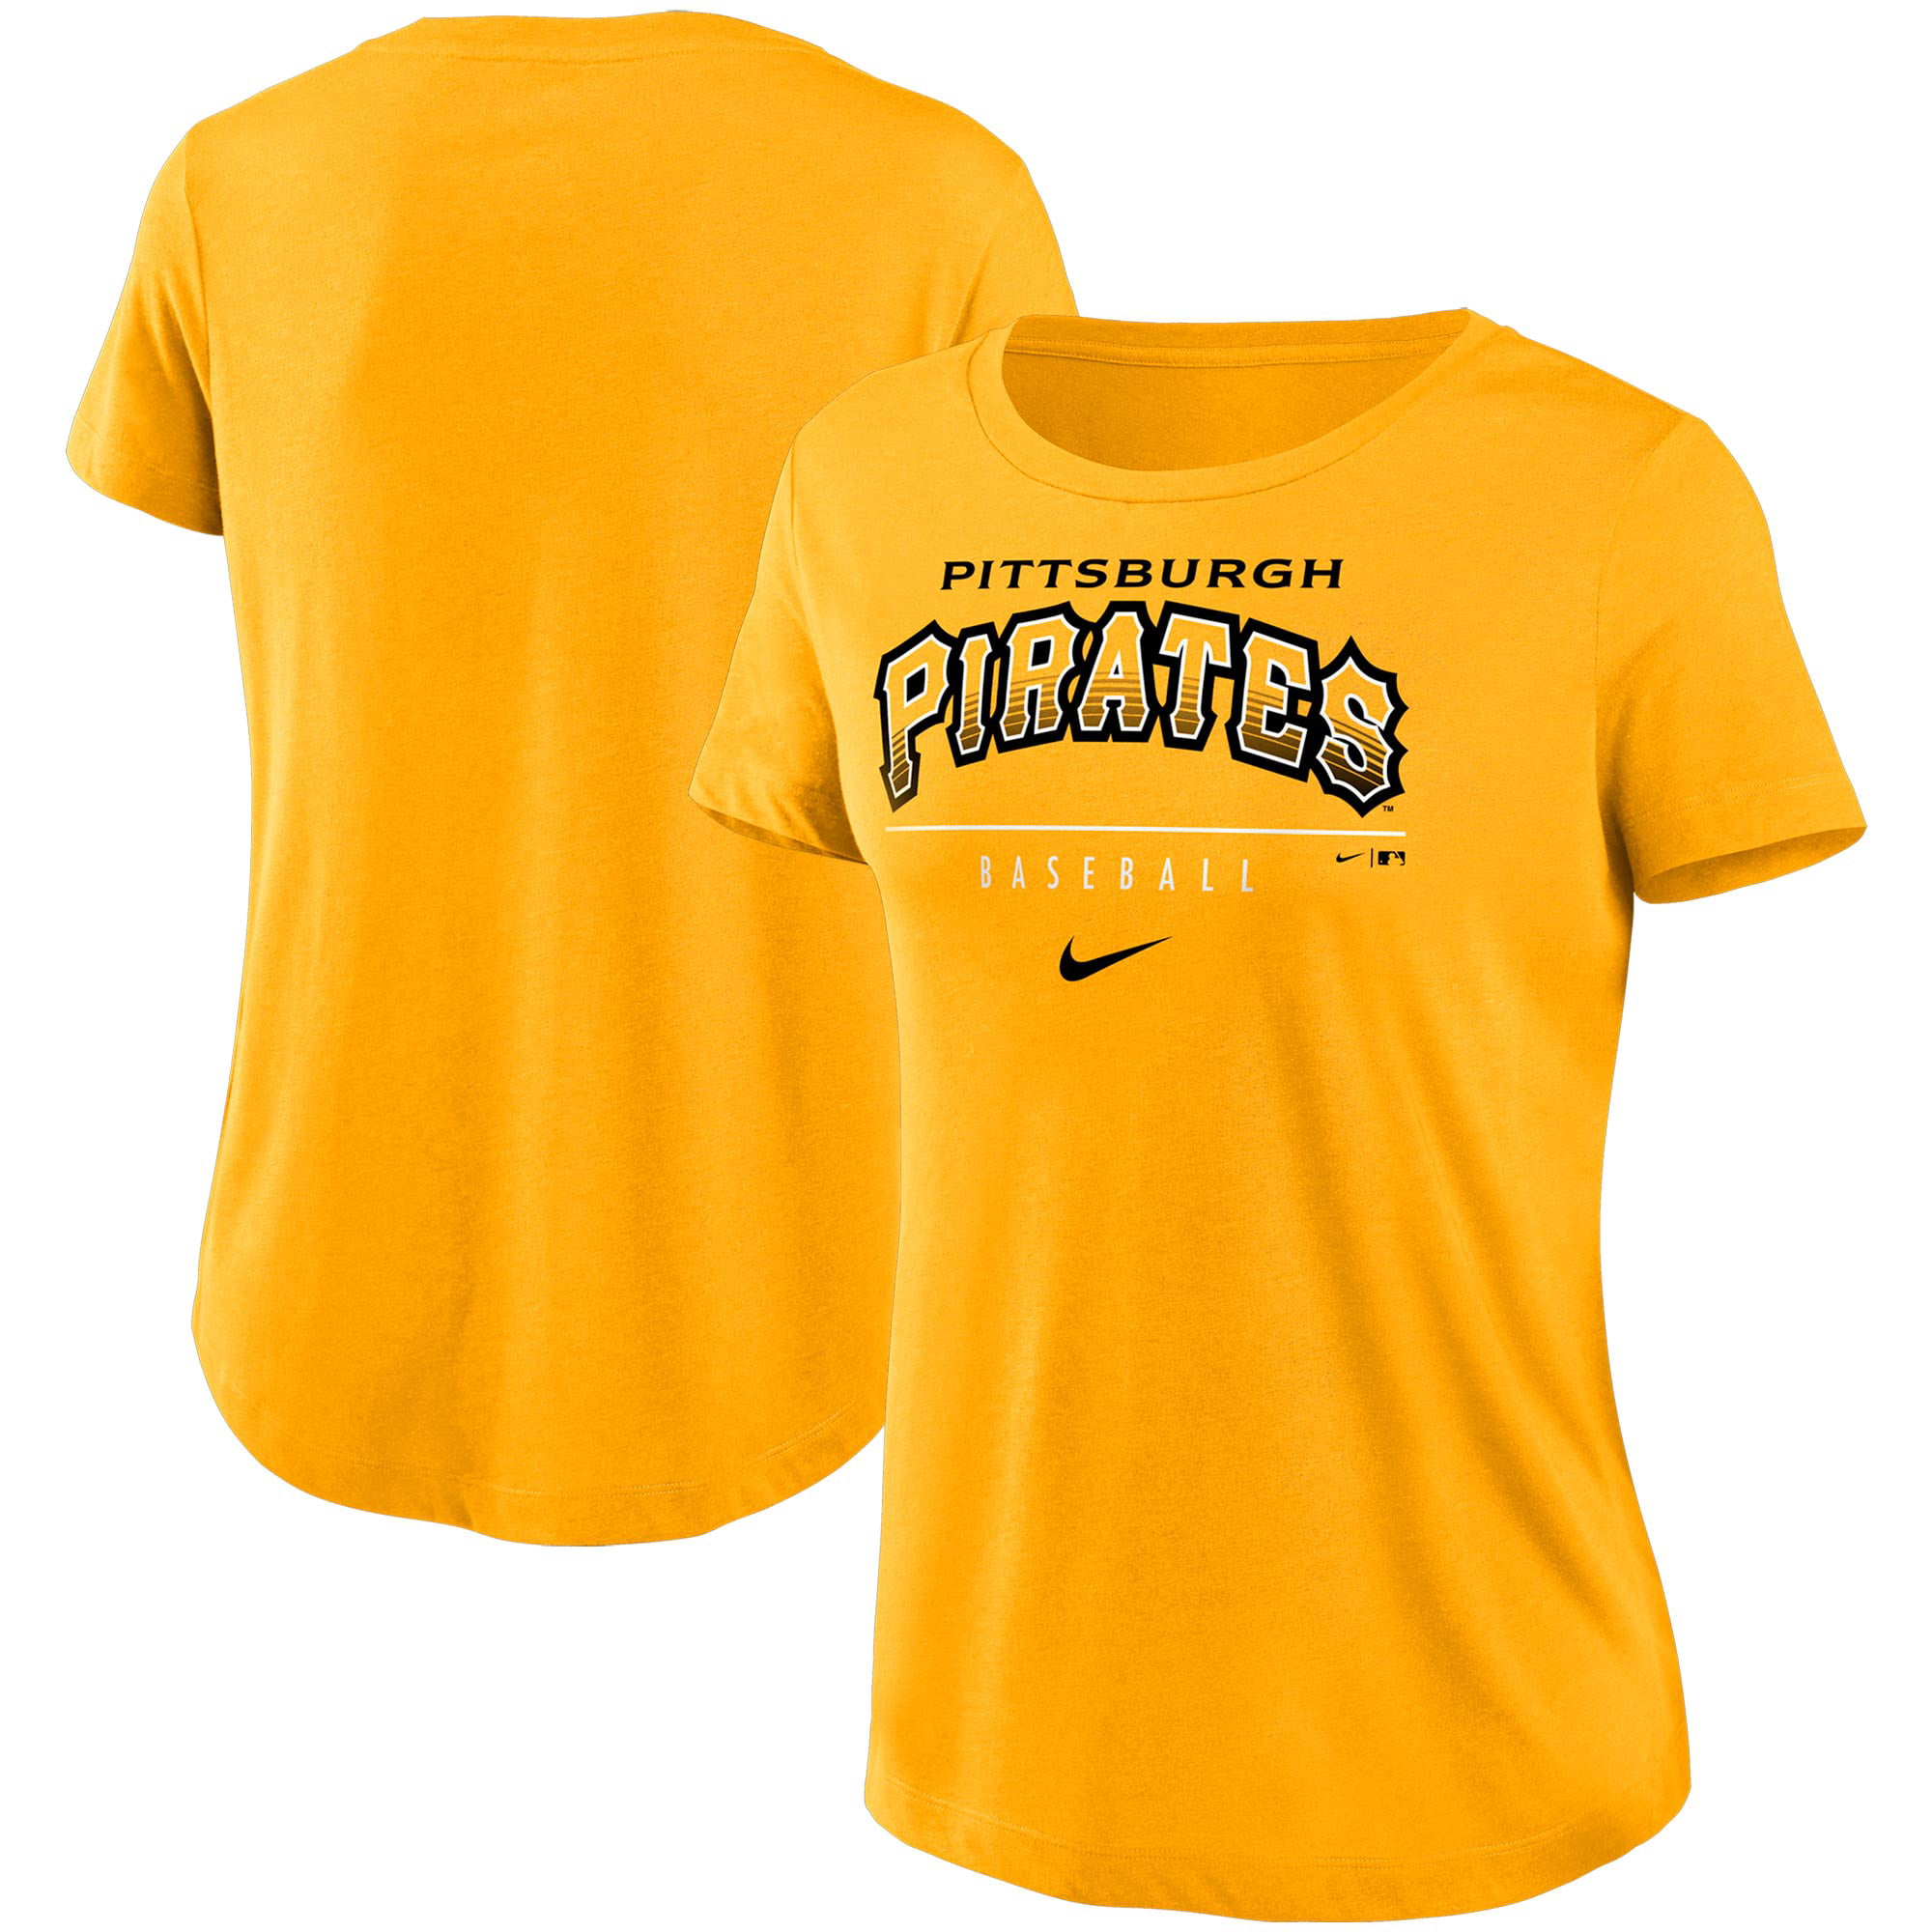 pittsburgh pirates lettering